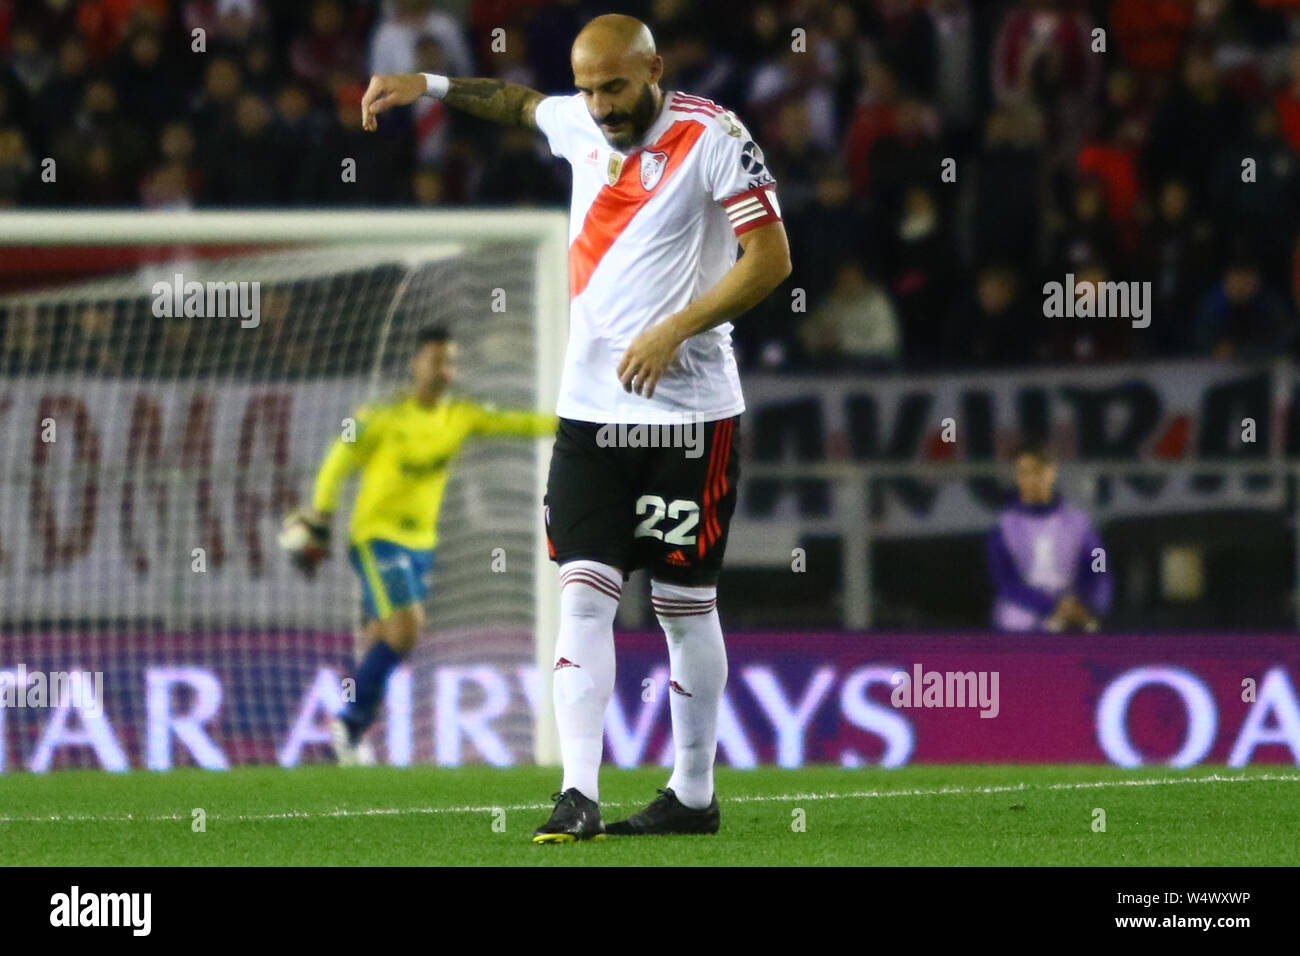 BUENOS AIRES, 23.07.2019: Javier Pinola was injured during the match between River Plate (ARG) and Cruzeiro (BRA) for match of Conmebol Libertadores o Stock Photo